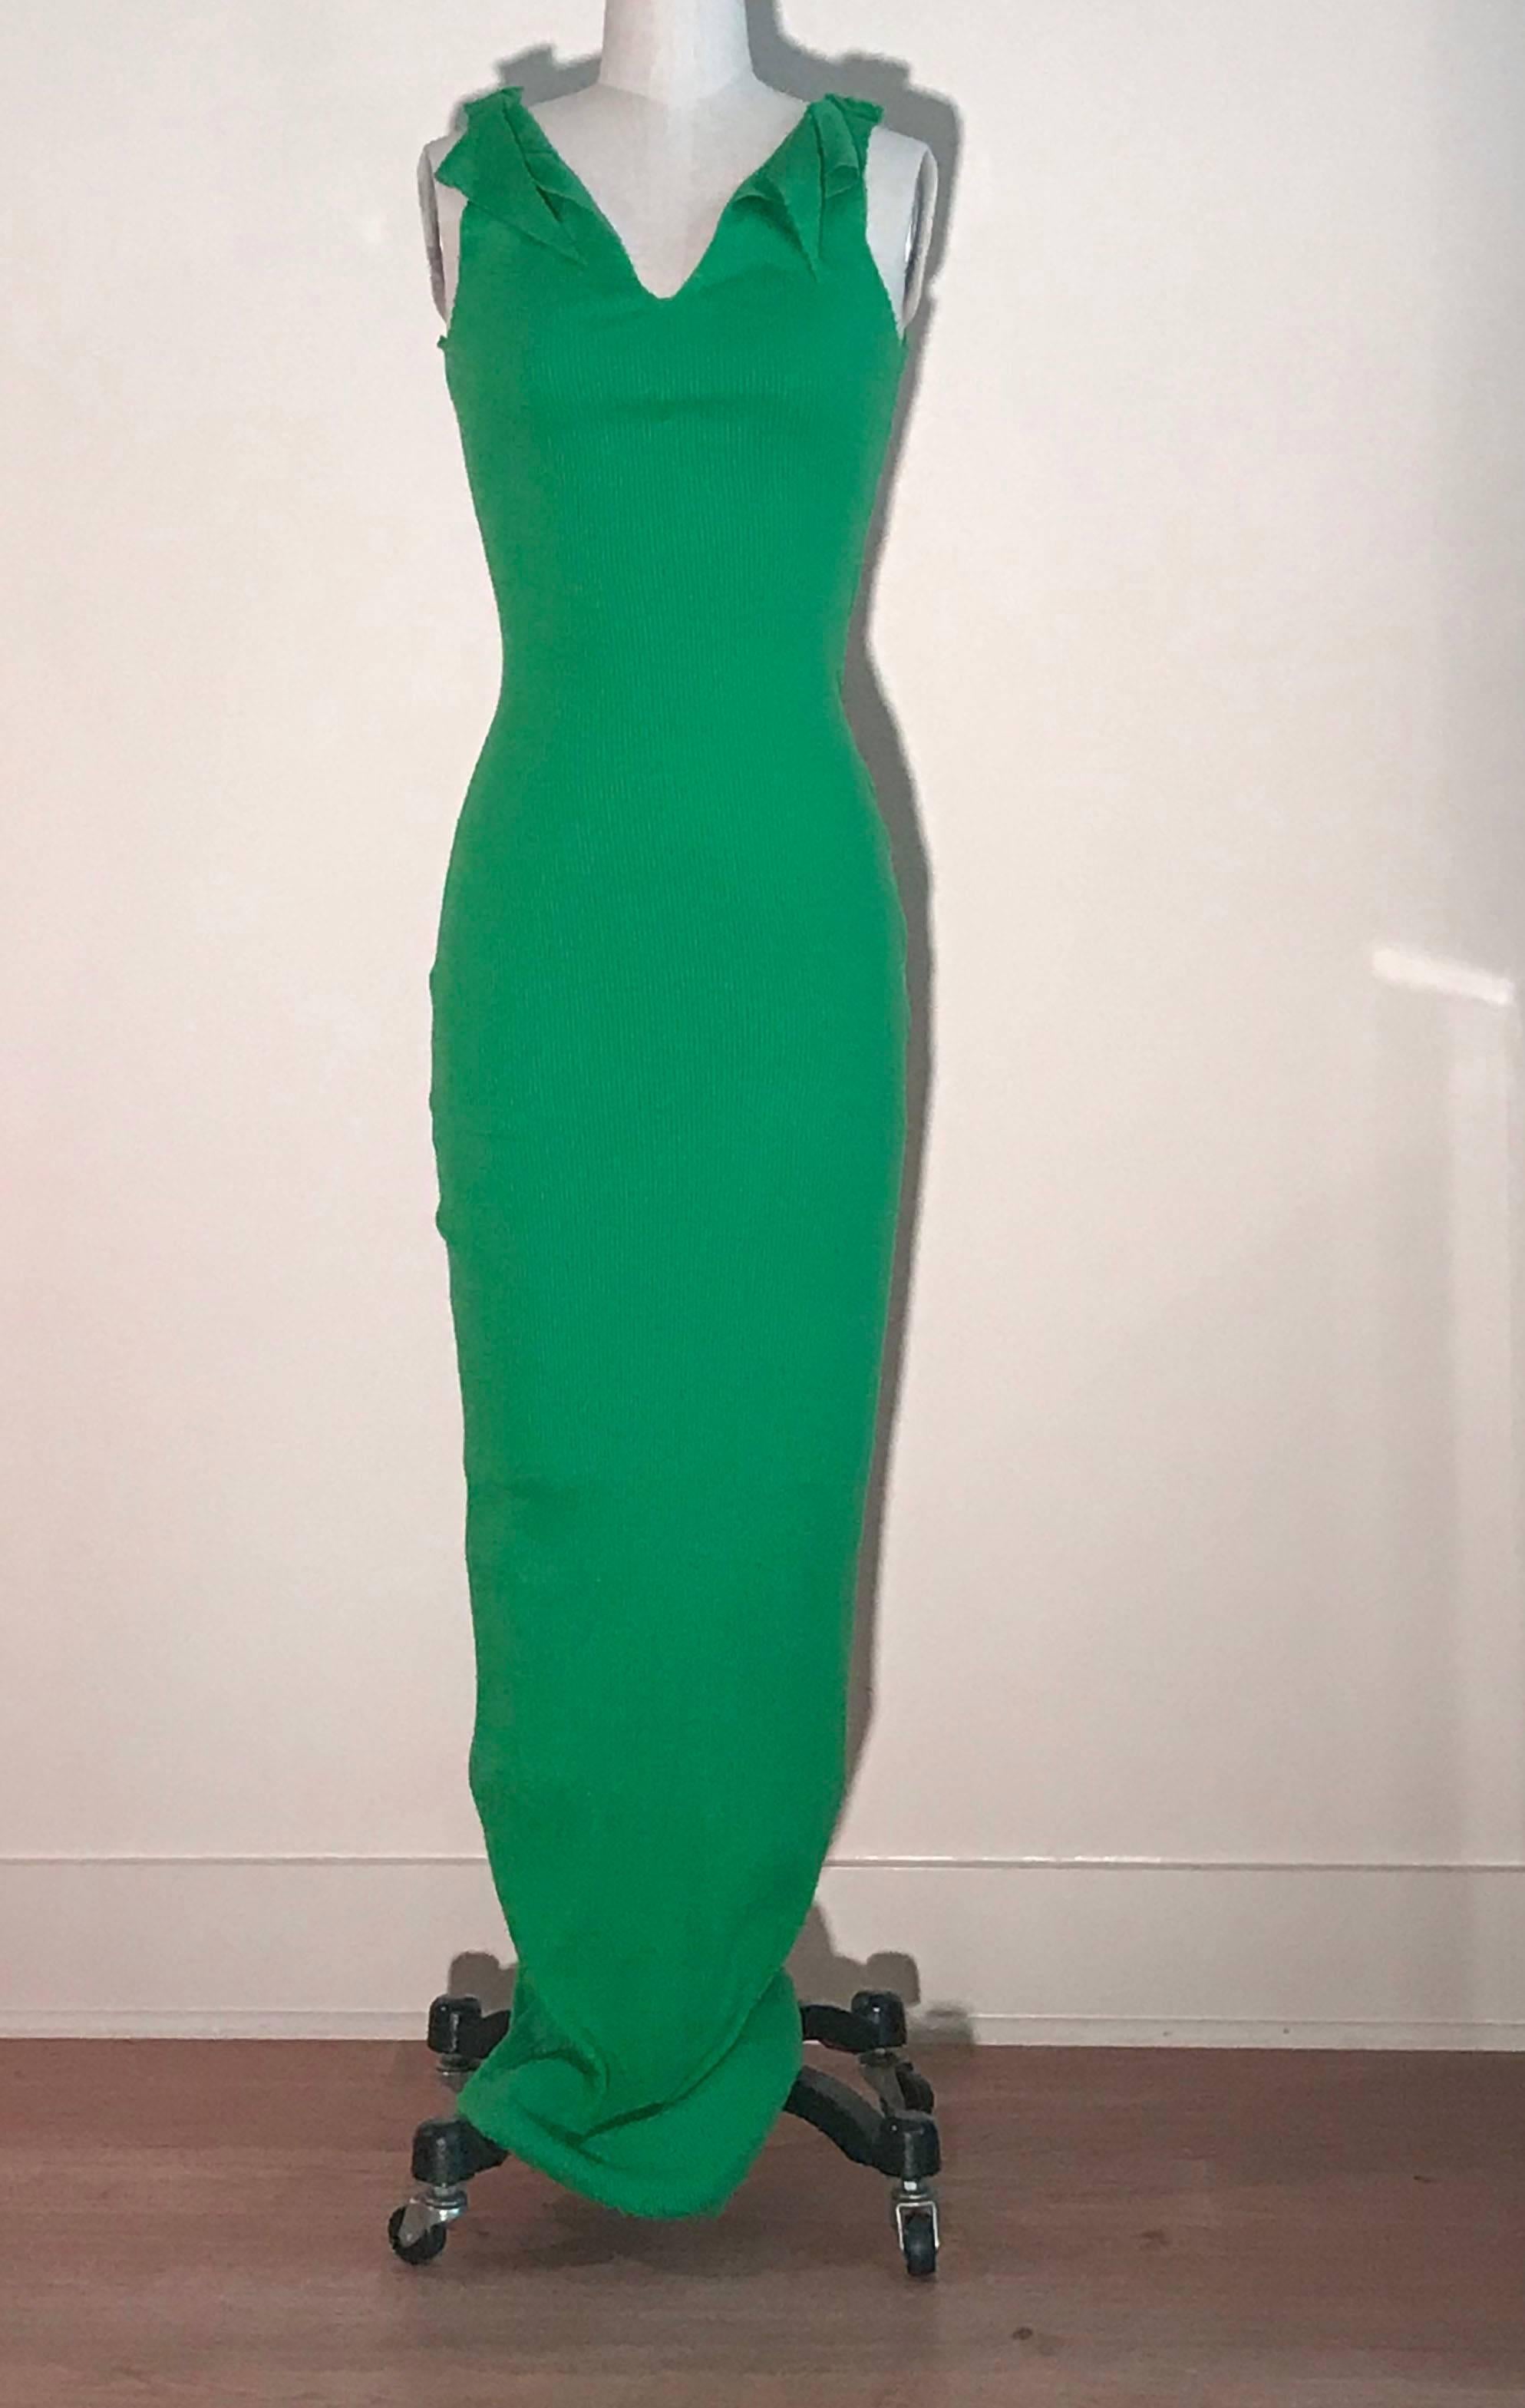 Patrick Kelly vintage 1980s long green rib knit dress with raw edge detail. Draped detail and exposed seam at shoulders, raw edge at back.  (We also have this dress available in red and blue.)

From an auction of the Atelier of Patrick Kelly.   

No